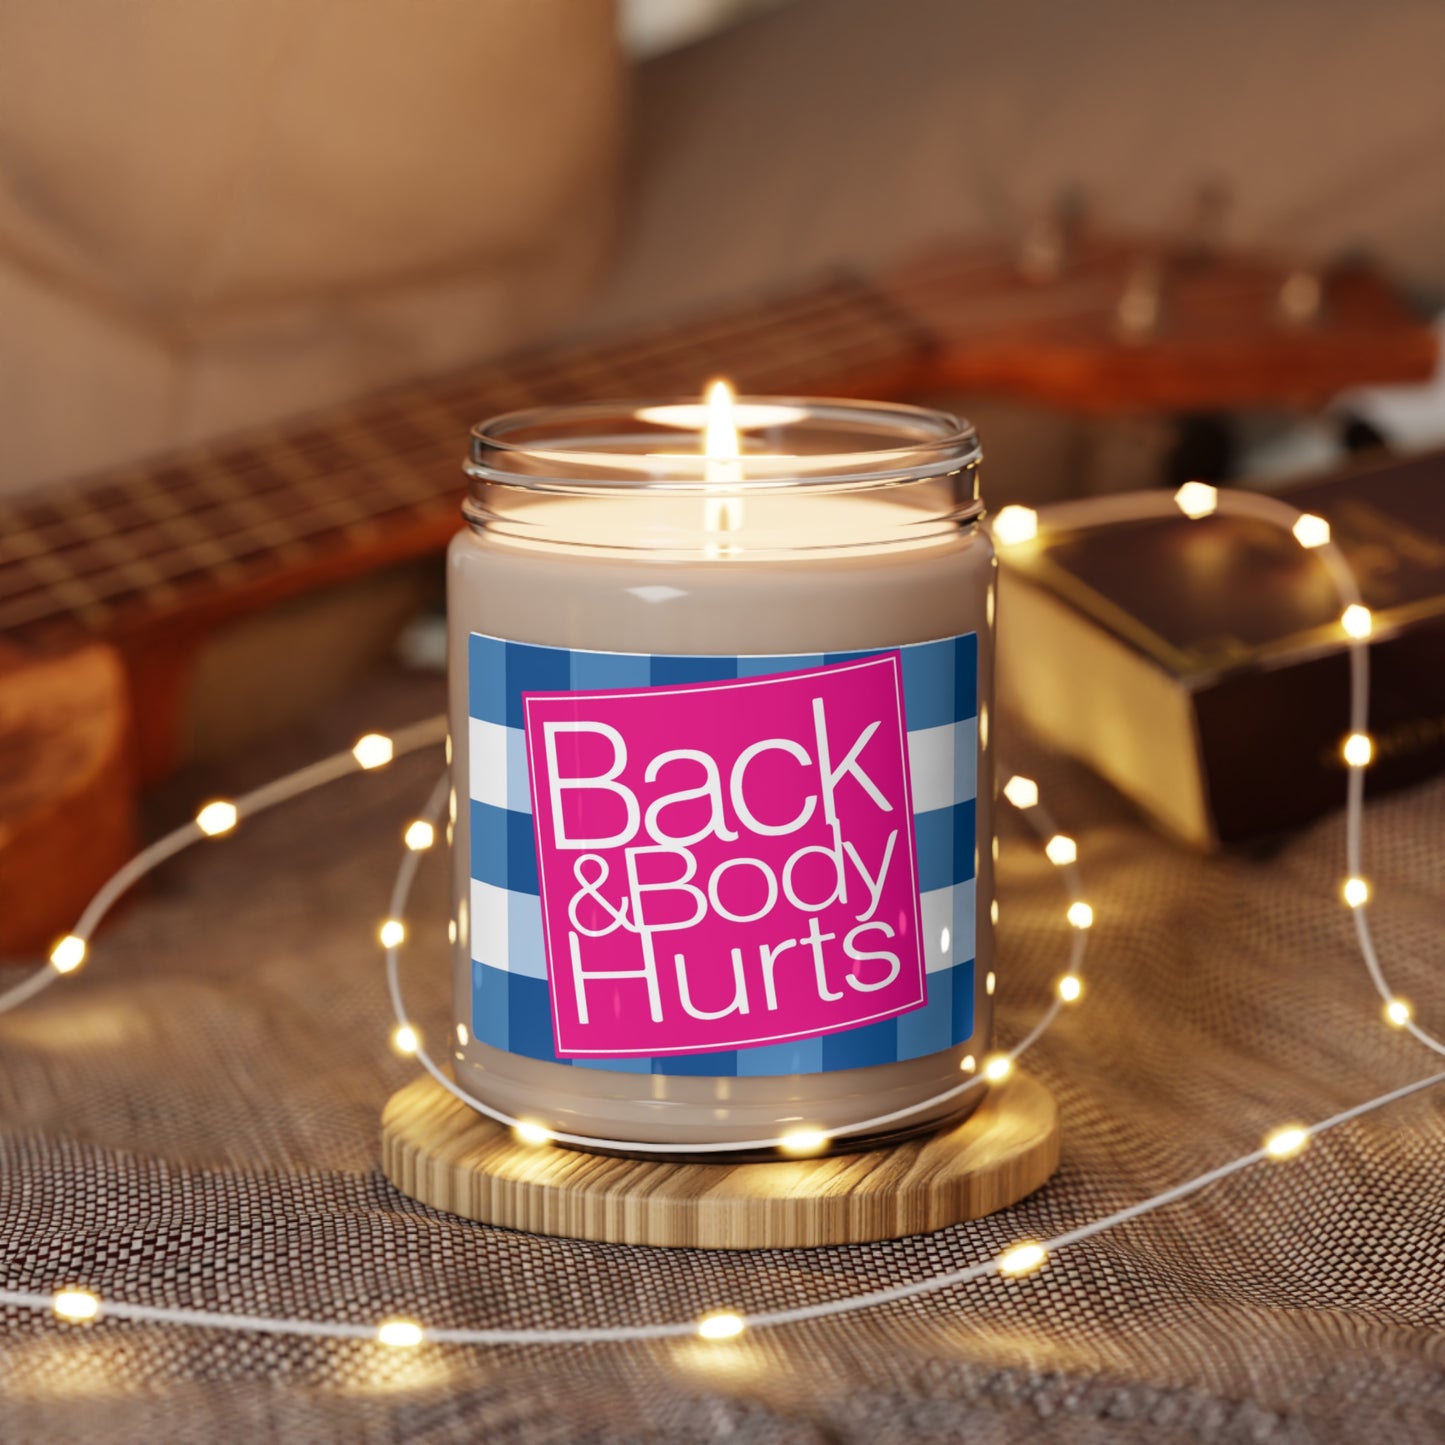 Back and Body Hurts Scented Soy Candle Quirky Saying| Funny Sayings on 9oz Scented Candles| Sassy Meme Funny Candle|Parody Perfect Gift